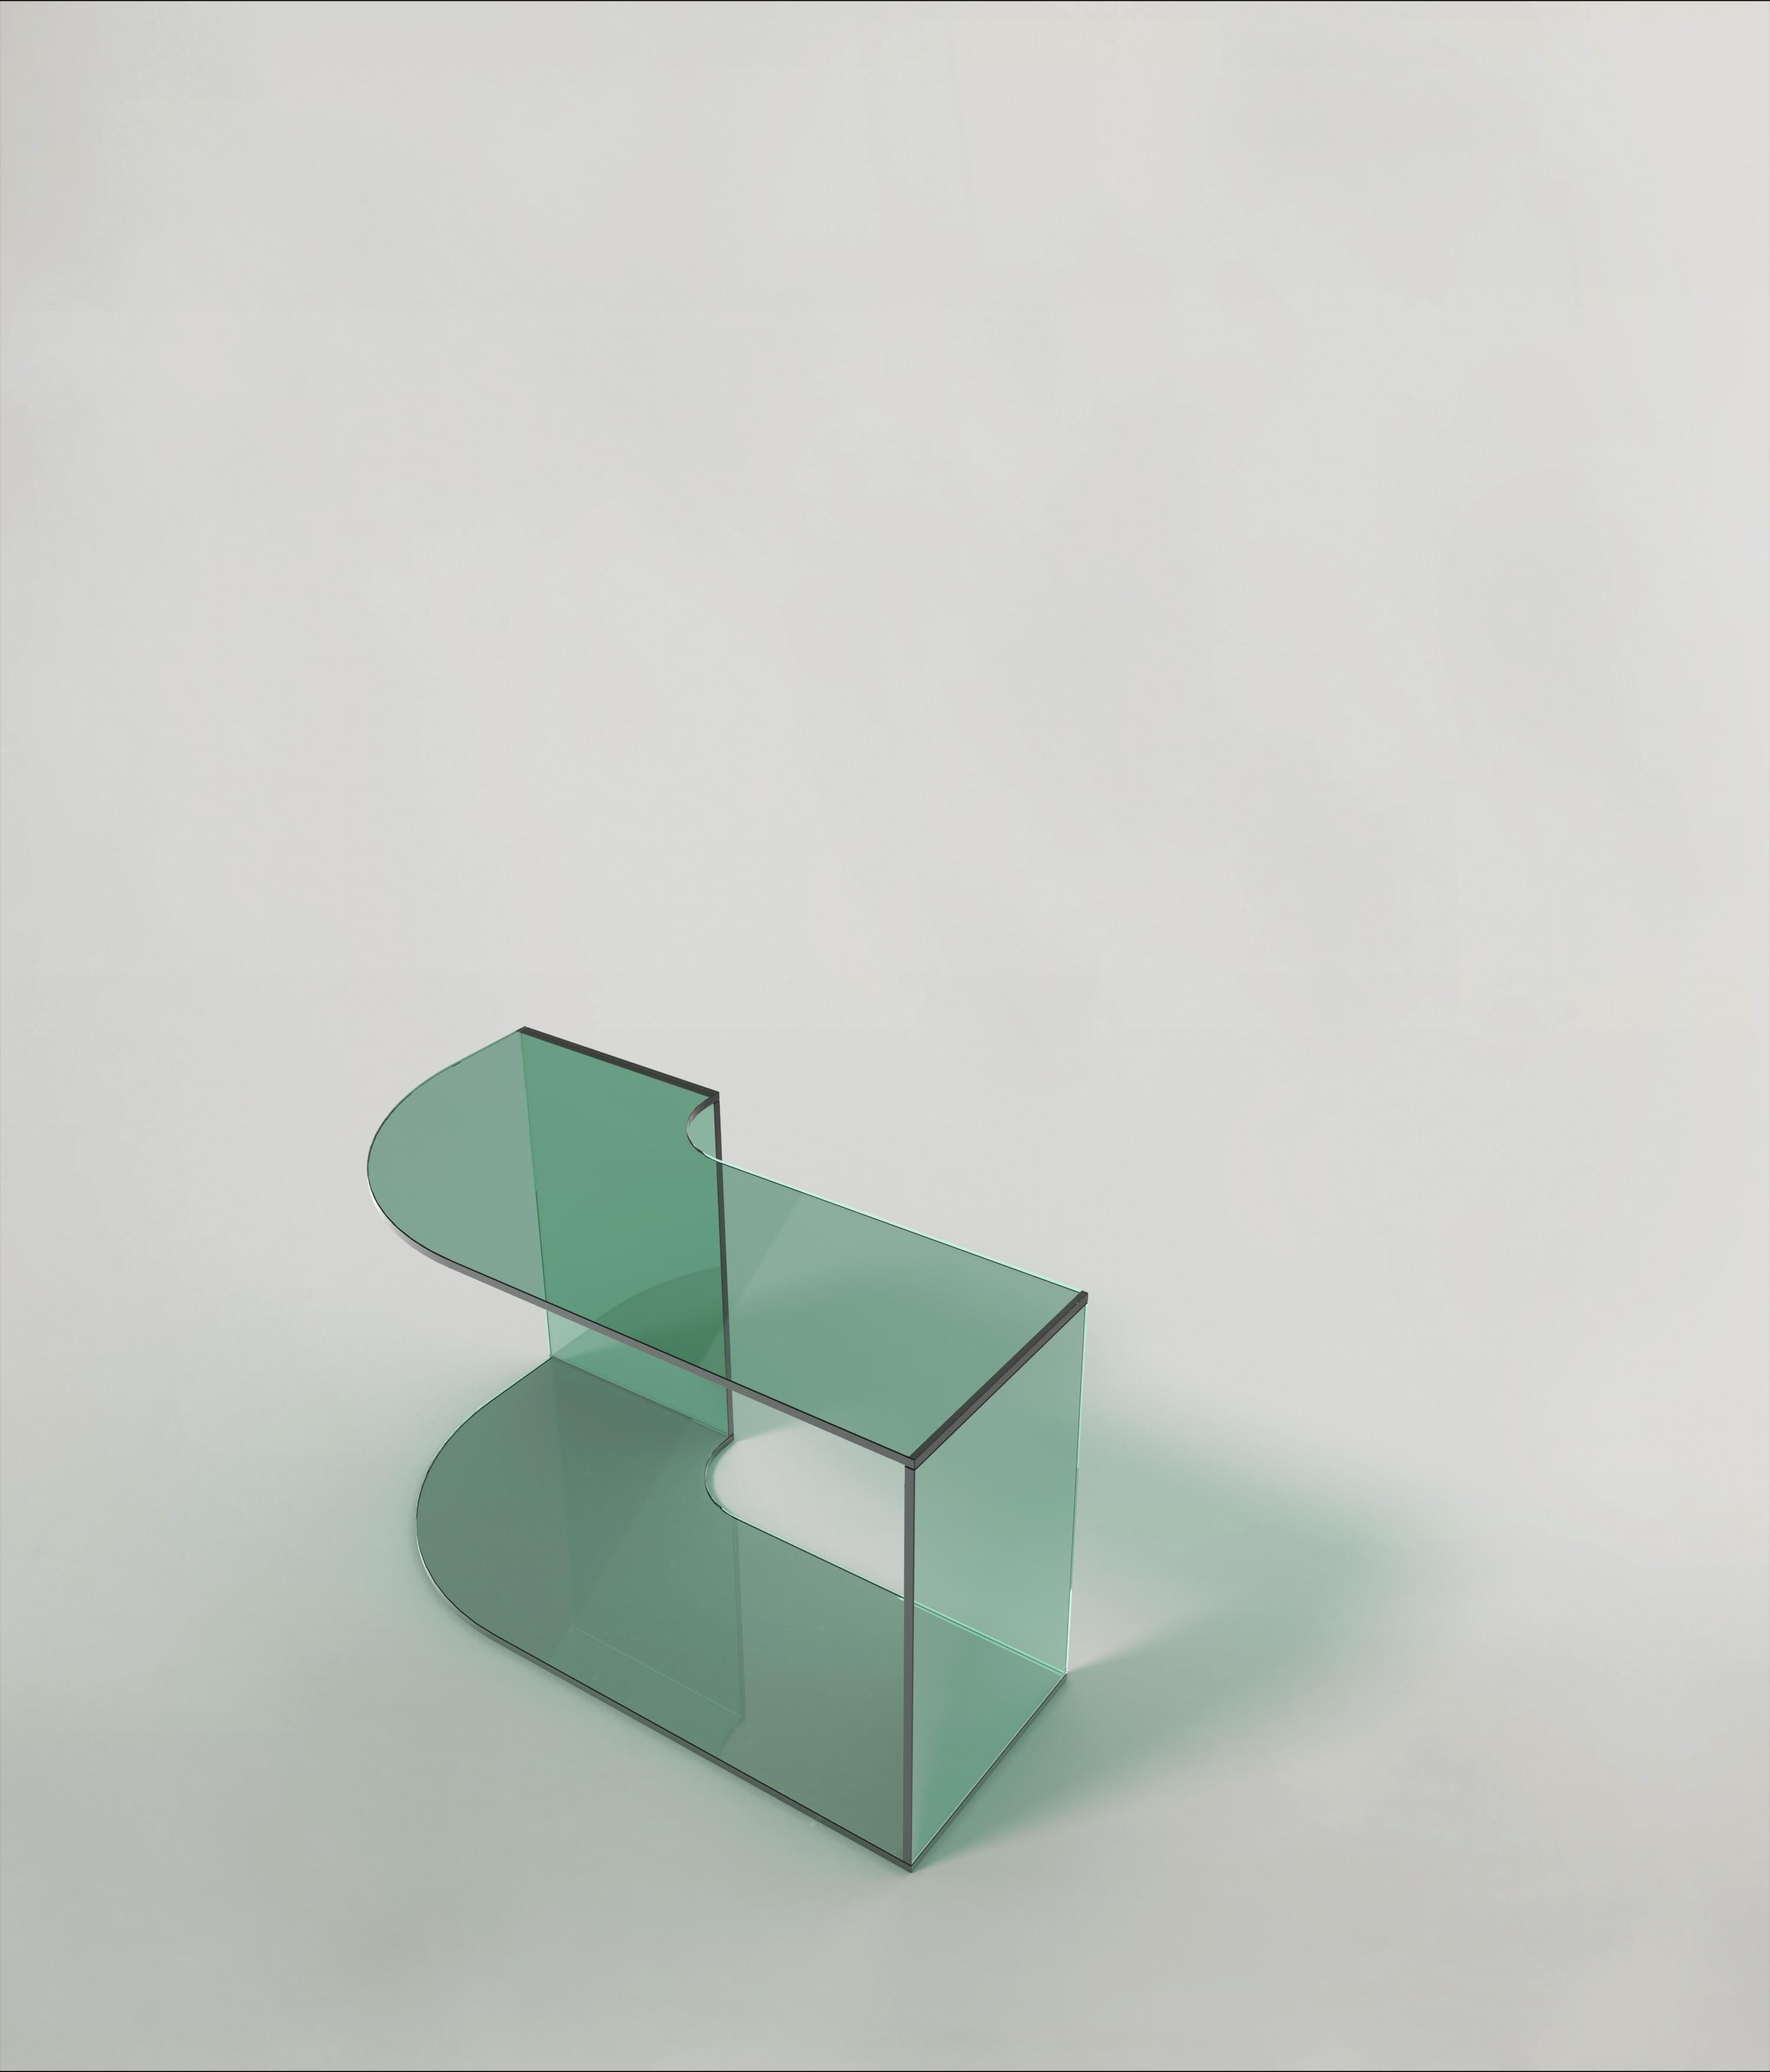 Quarter V2 coffee table by Edizione Limitata
Limited Edition of 1000 pieces. Signed and numbered.
Dimensions: D70 x W35 x H41 cm
Materials: Green Shiny Glass

Quarter is a collection of contemporary side tables made by Italian artisans in colored